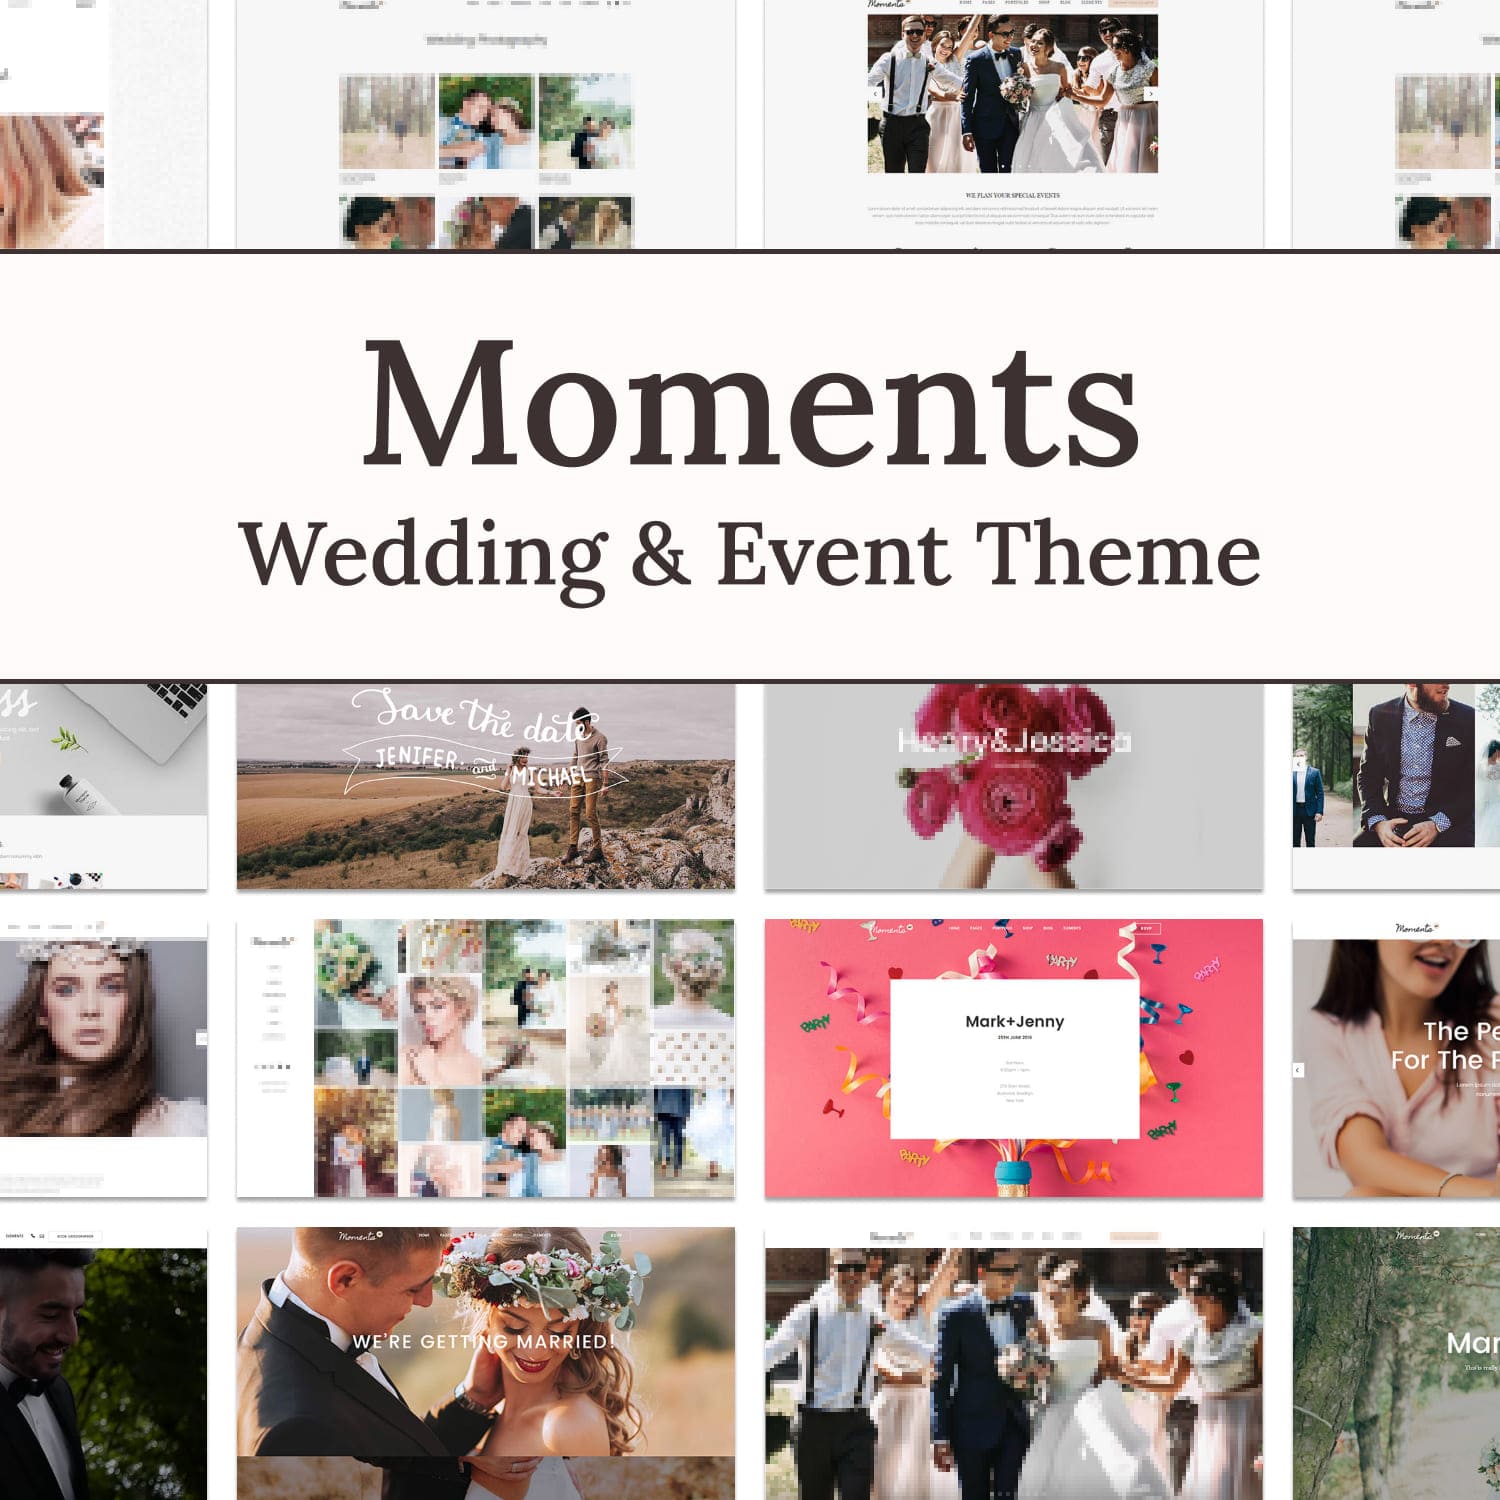 Moments wedding event theme, main picture 1500x1500.